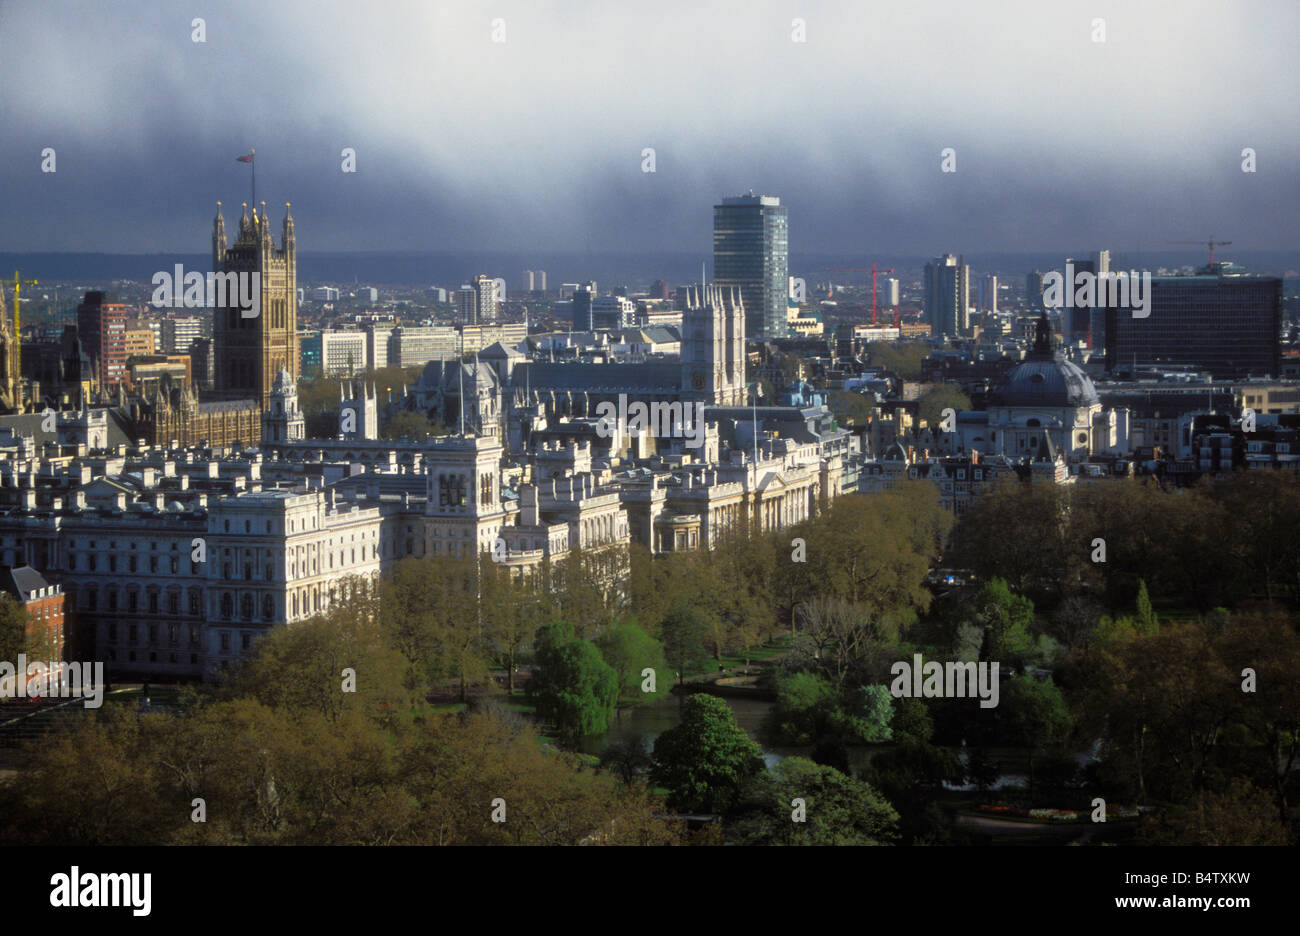 Stormy weather conditions over London, Houses of Parliament visible to left, Westminster Abbey in centre, London, United Kingdom Stock Photo